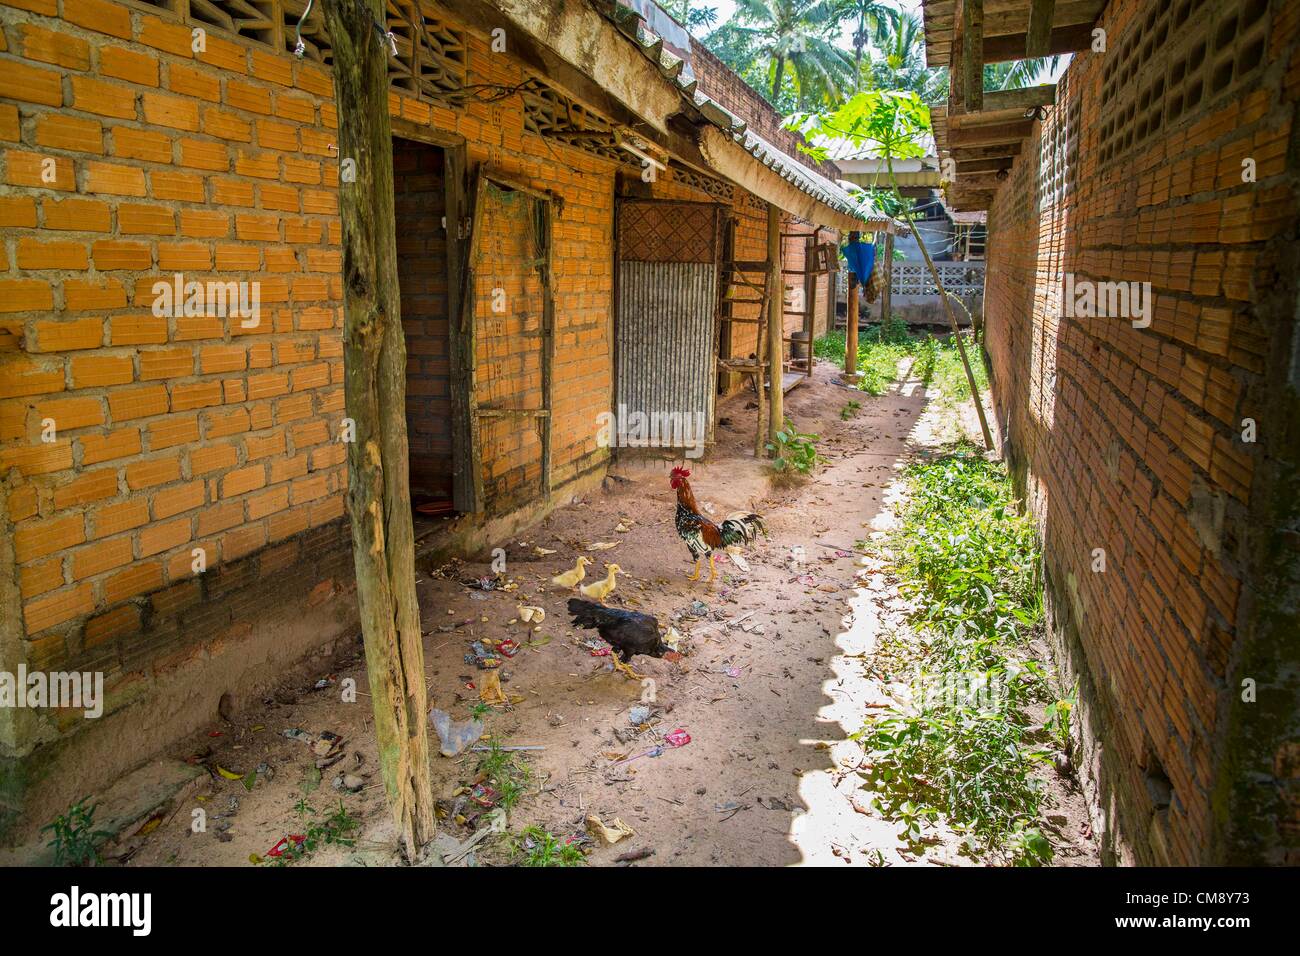 Oct. 29, 2012 - Mayo, Pattani, Thailand - Chickens peck in the dirt between rows of patients' rooms at the Bukit Kong home. The home opened 27 years ago as a Pondo School, or traditional Islamic school, in the Mayo district of Pattani. Shortly after it opened, people asked the headmaster to look after individuals with mental illness. (Credit Image: © Jack Kurtz/ZUMAPRESS.com) Stock Photo